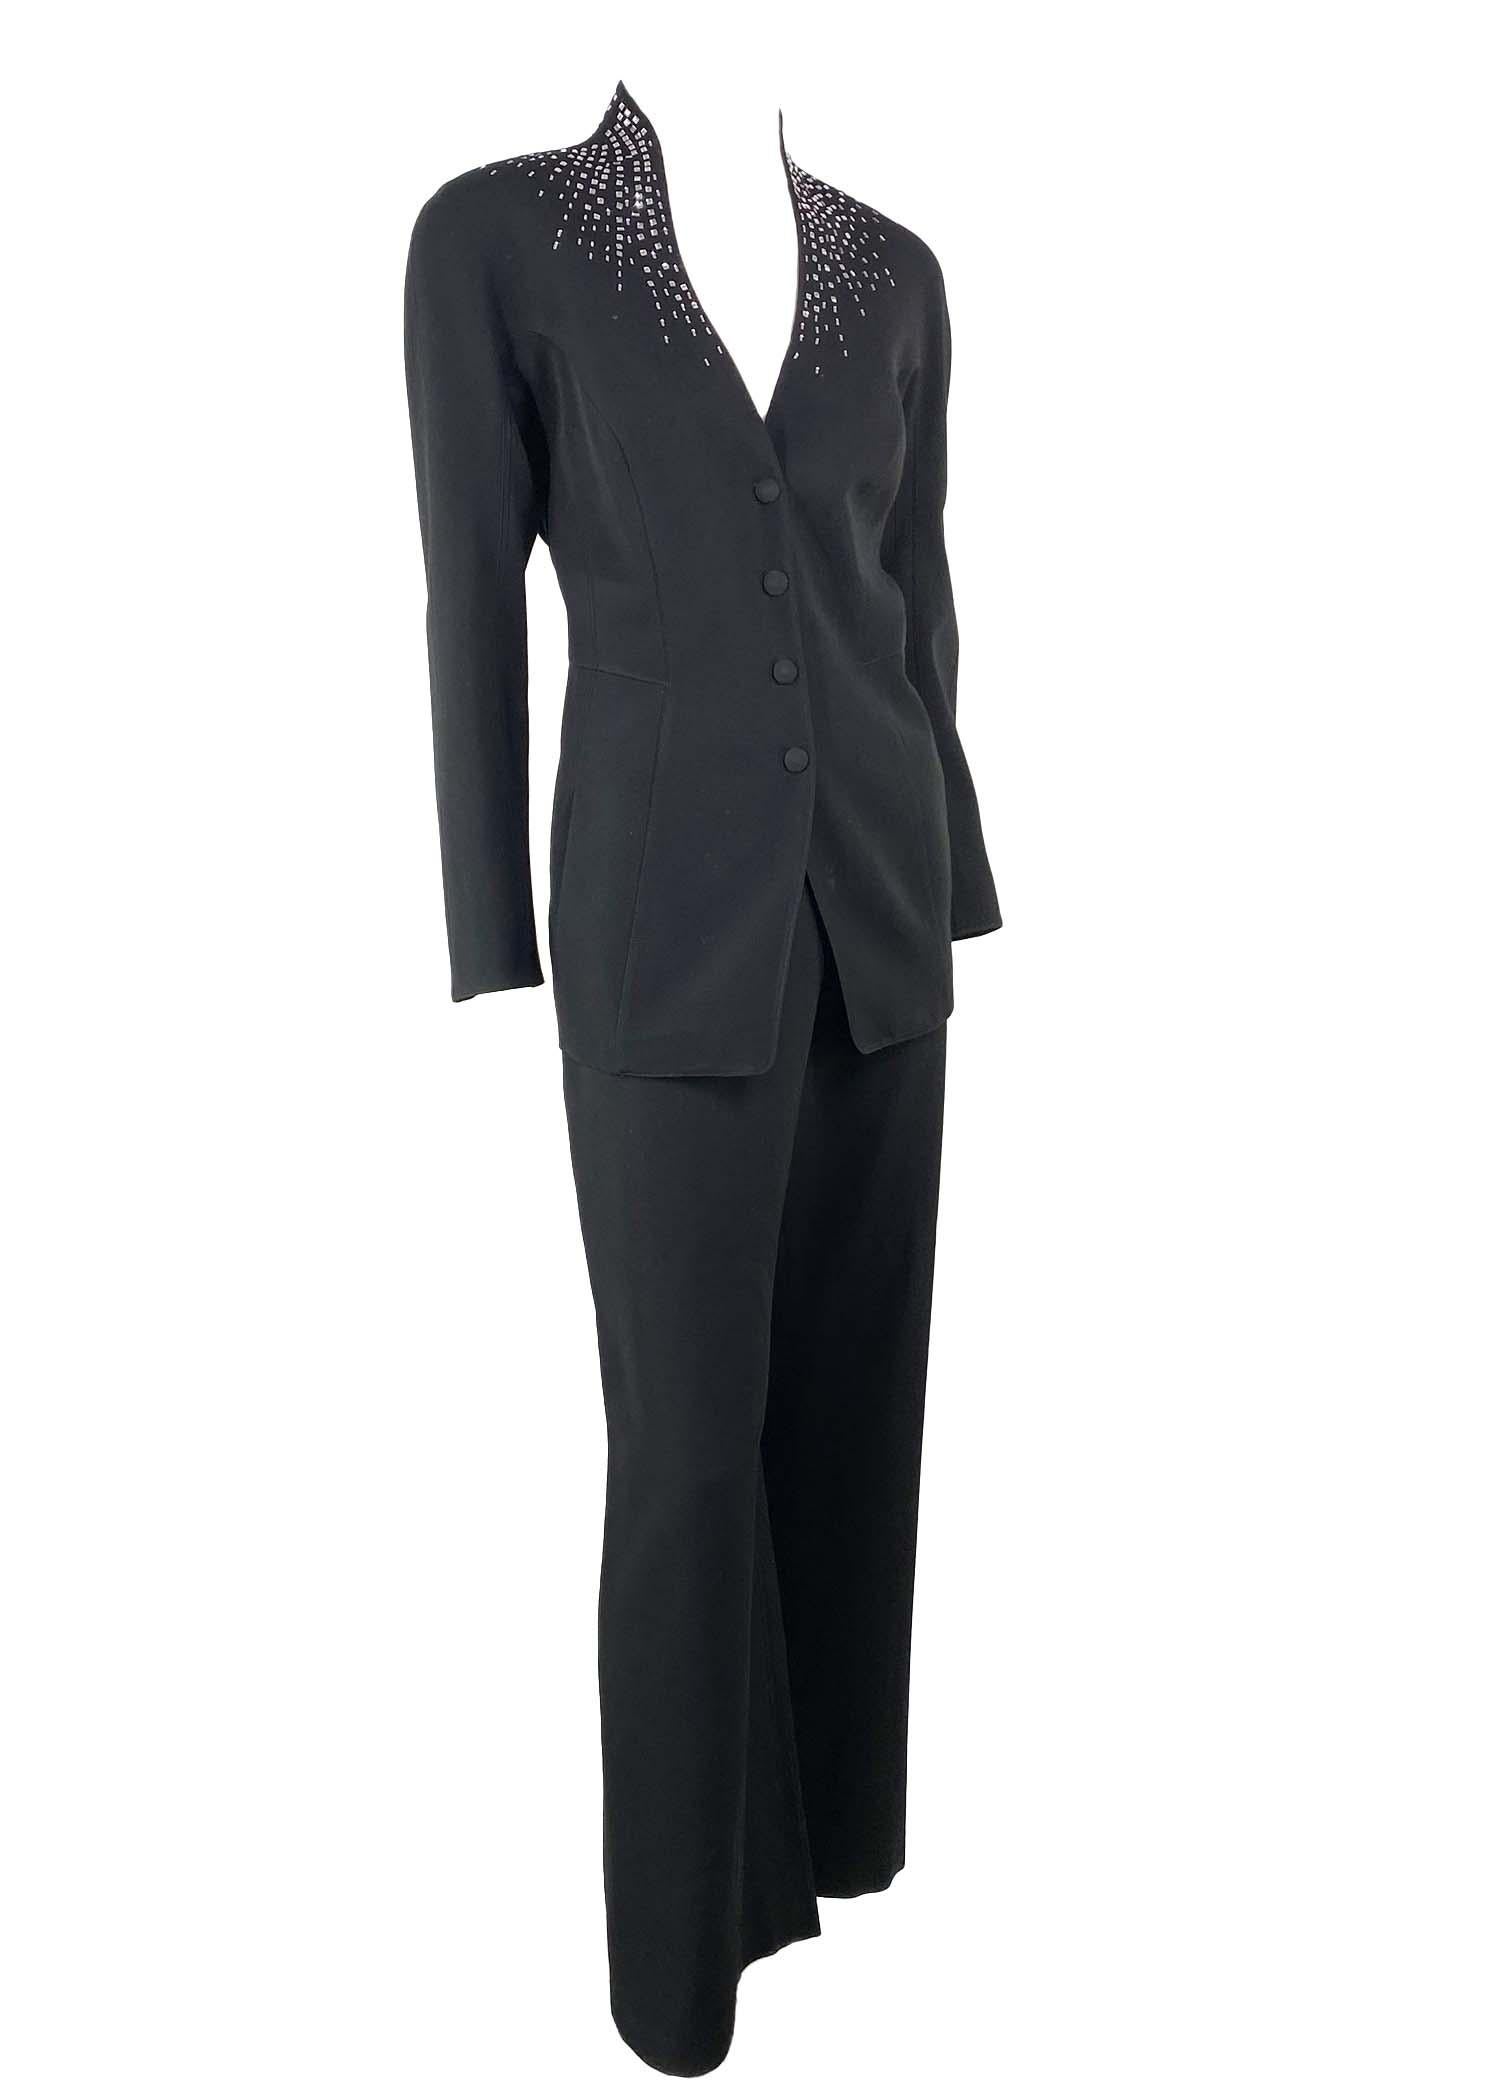 Presenting a rhinestone Thierry Mugler pantsuit, designed by Manfred Mugler. From the 1990s, this suit features masterful design and tailoring. The blazer features a stand up collar, snap closures, and rhinestones around the neck and nape of the